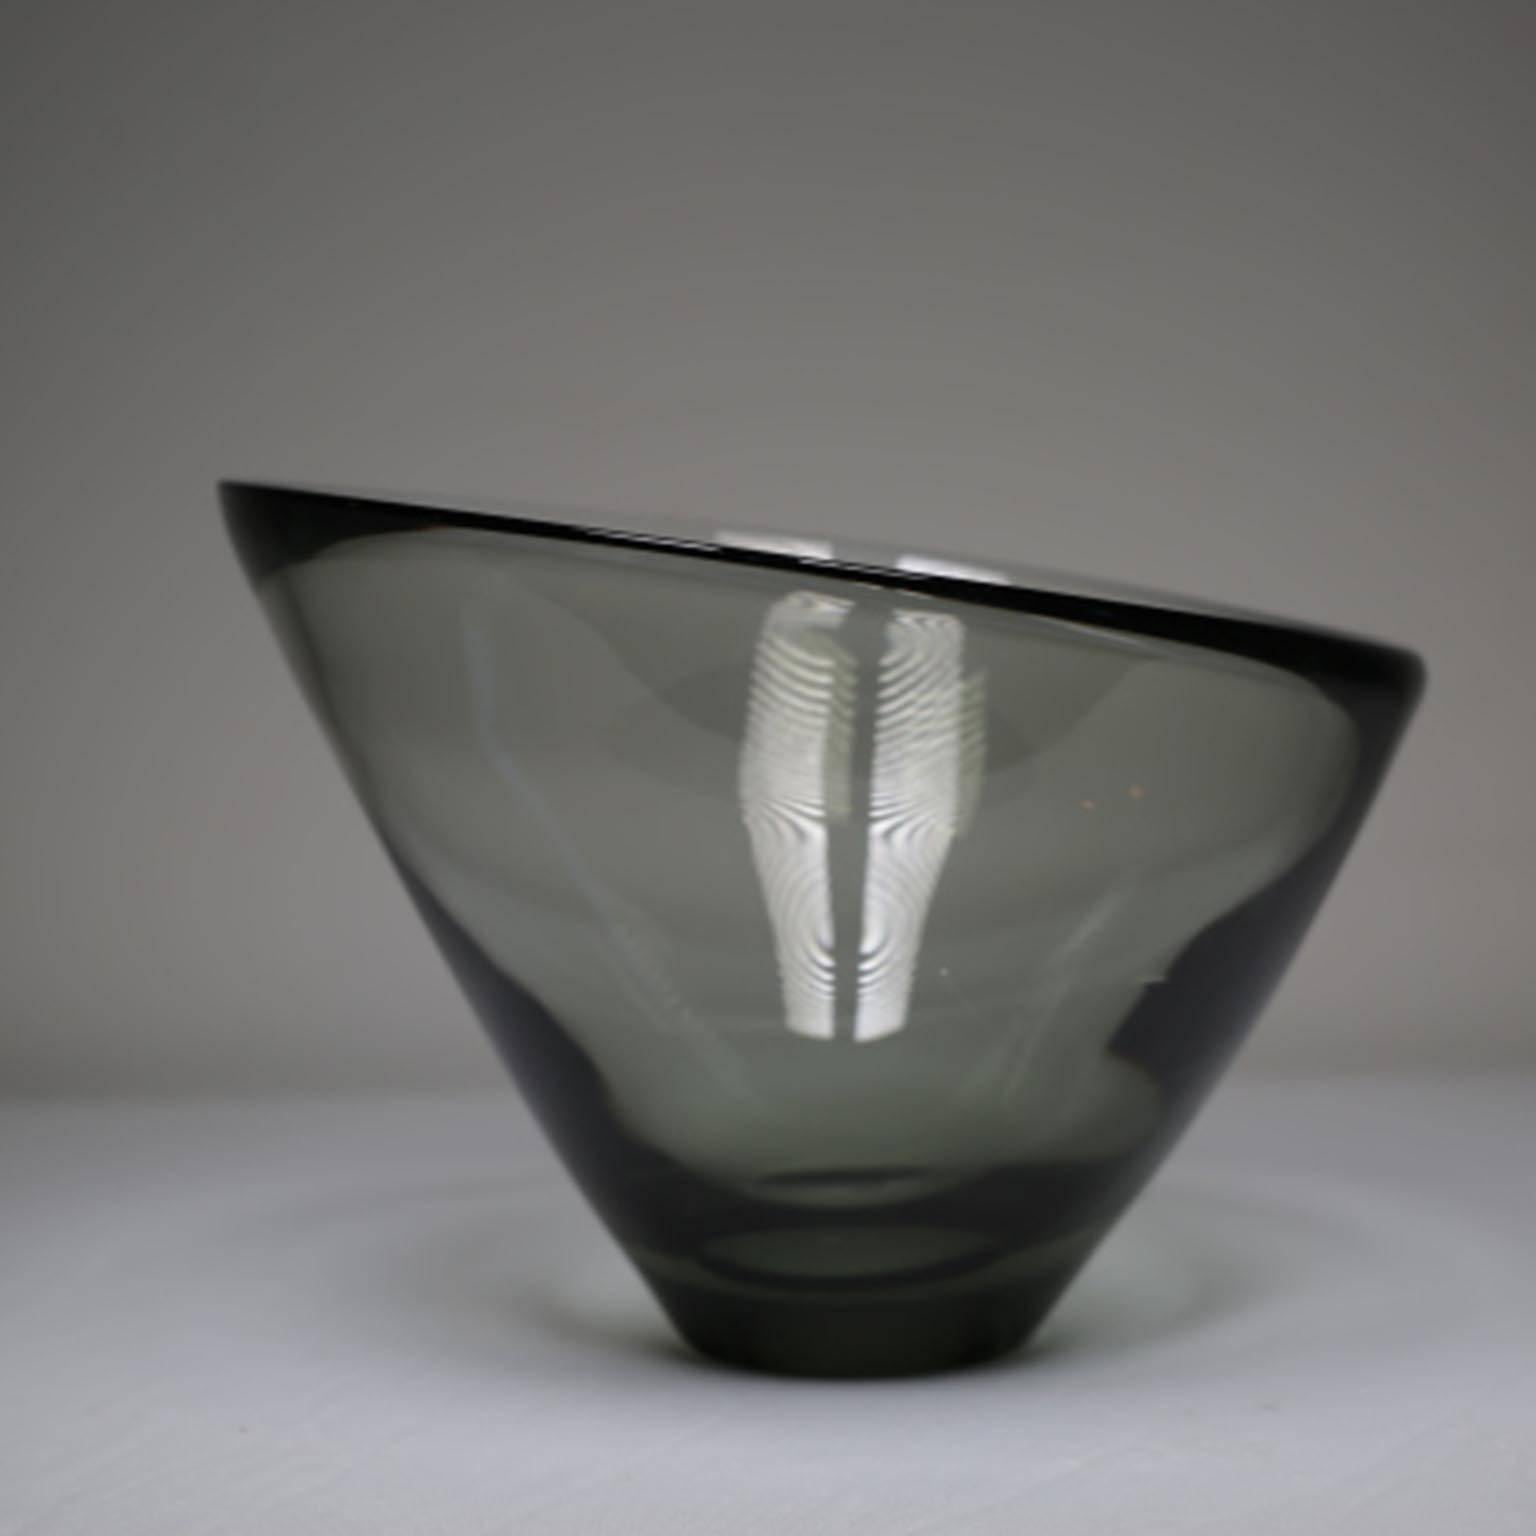 Mid-Century Modern Bowl Signed Holmegaard Denmark, circa 1950.
Smoke grey.
Minor damage on one side denoted in images.